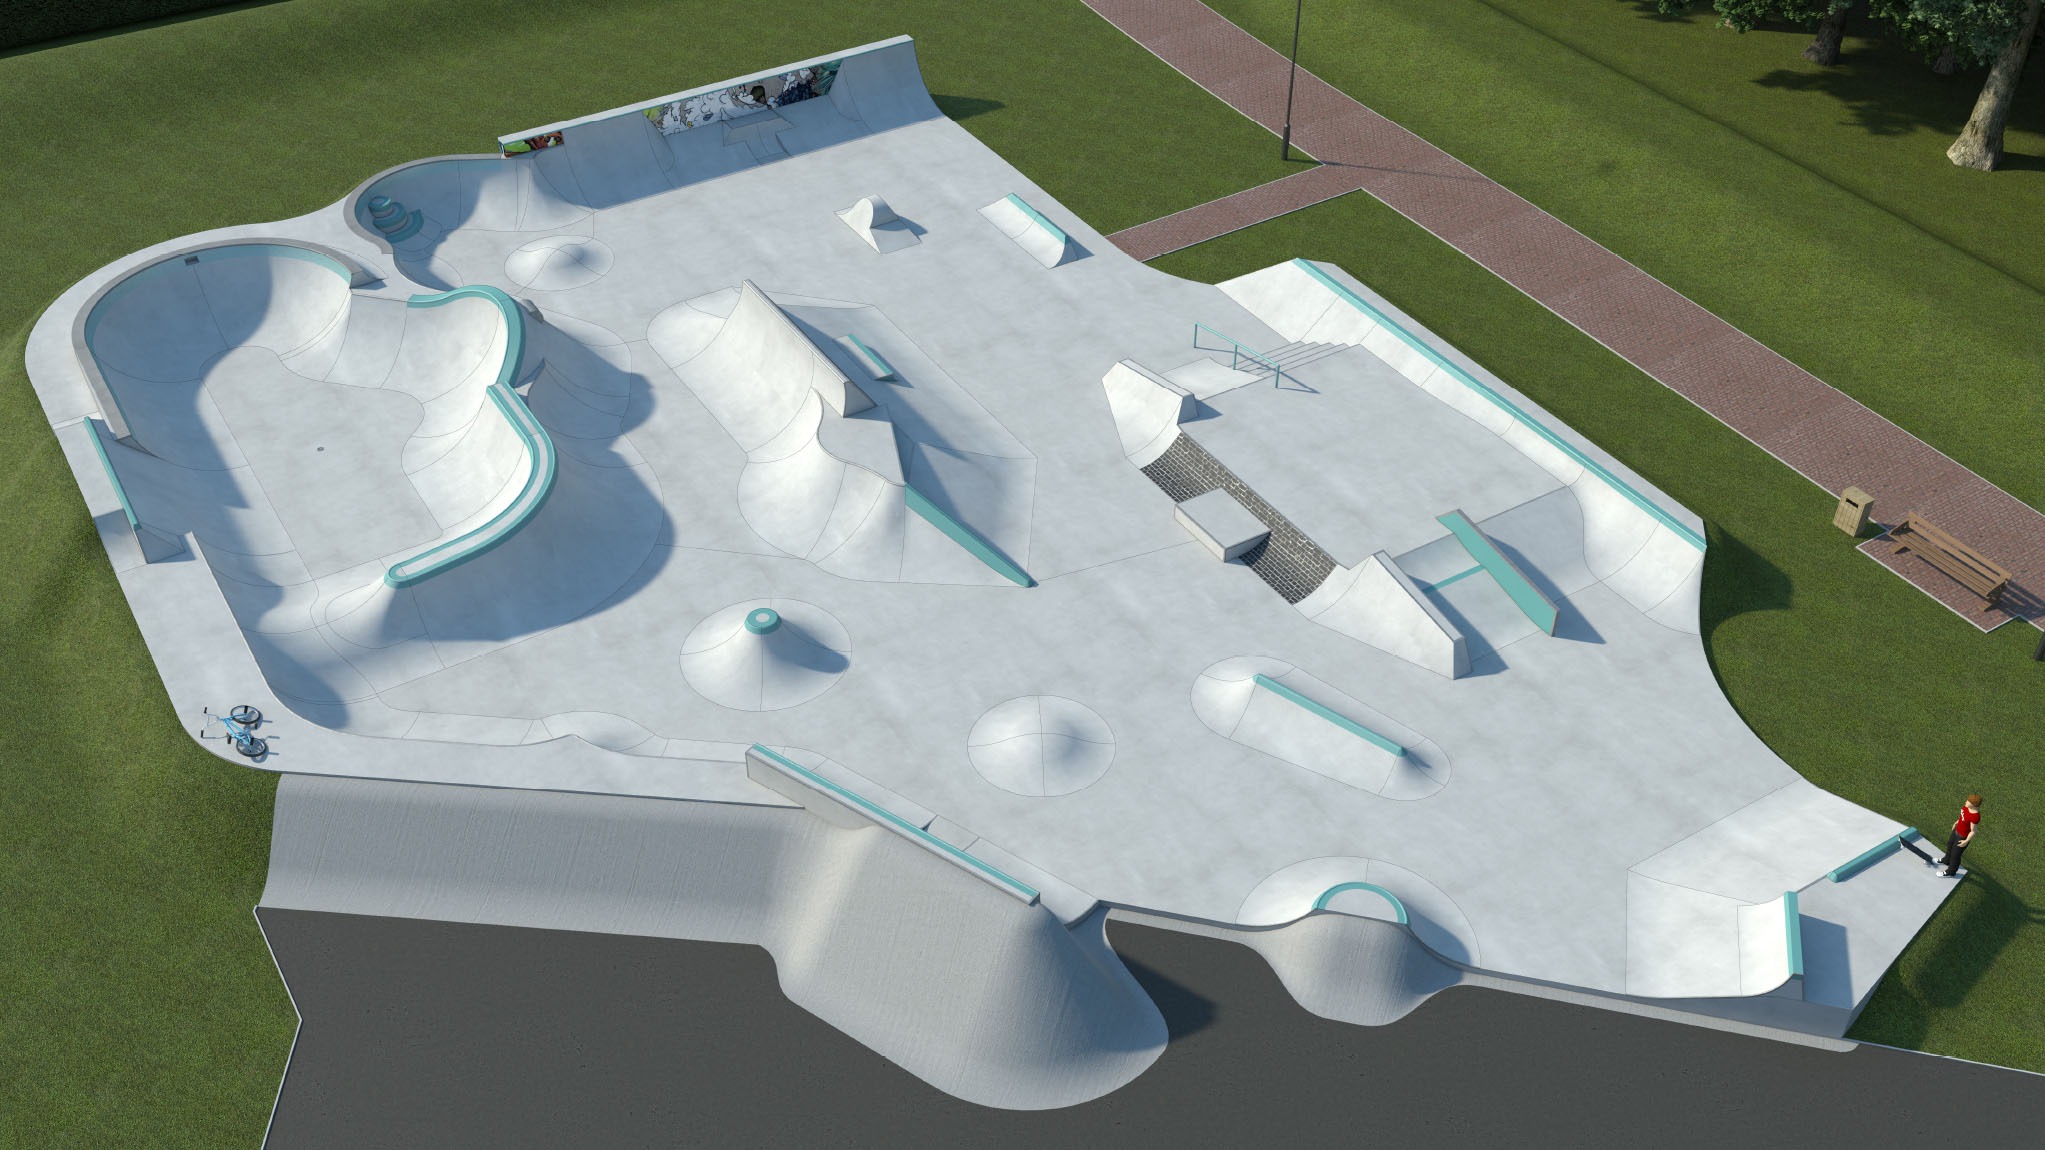 This new skatepark that's currently being built by Wheelscape looks AW...